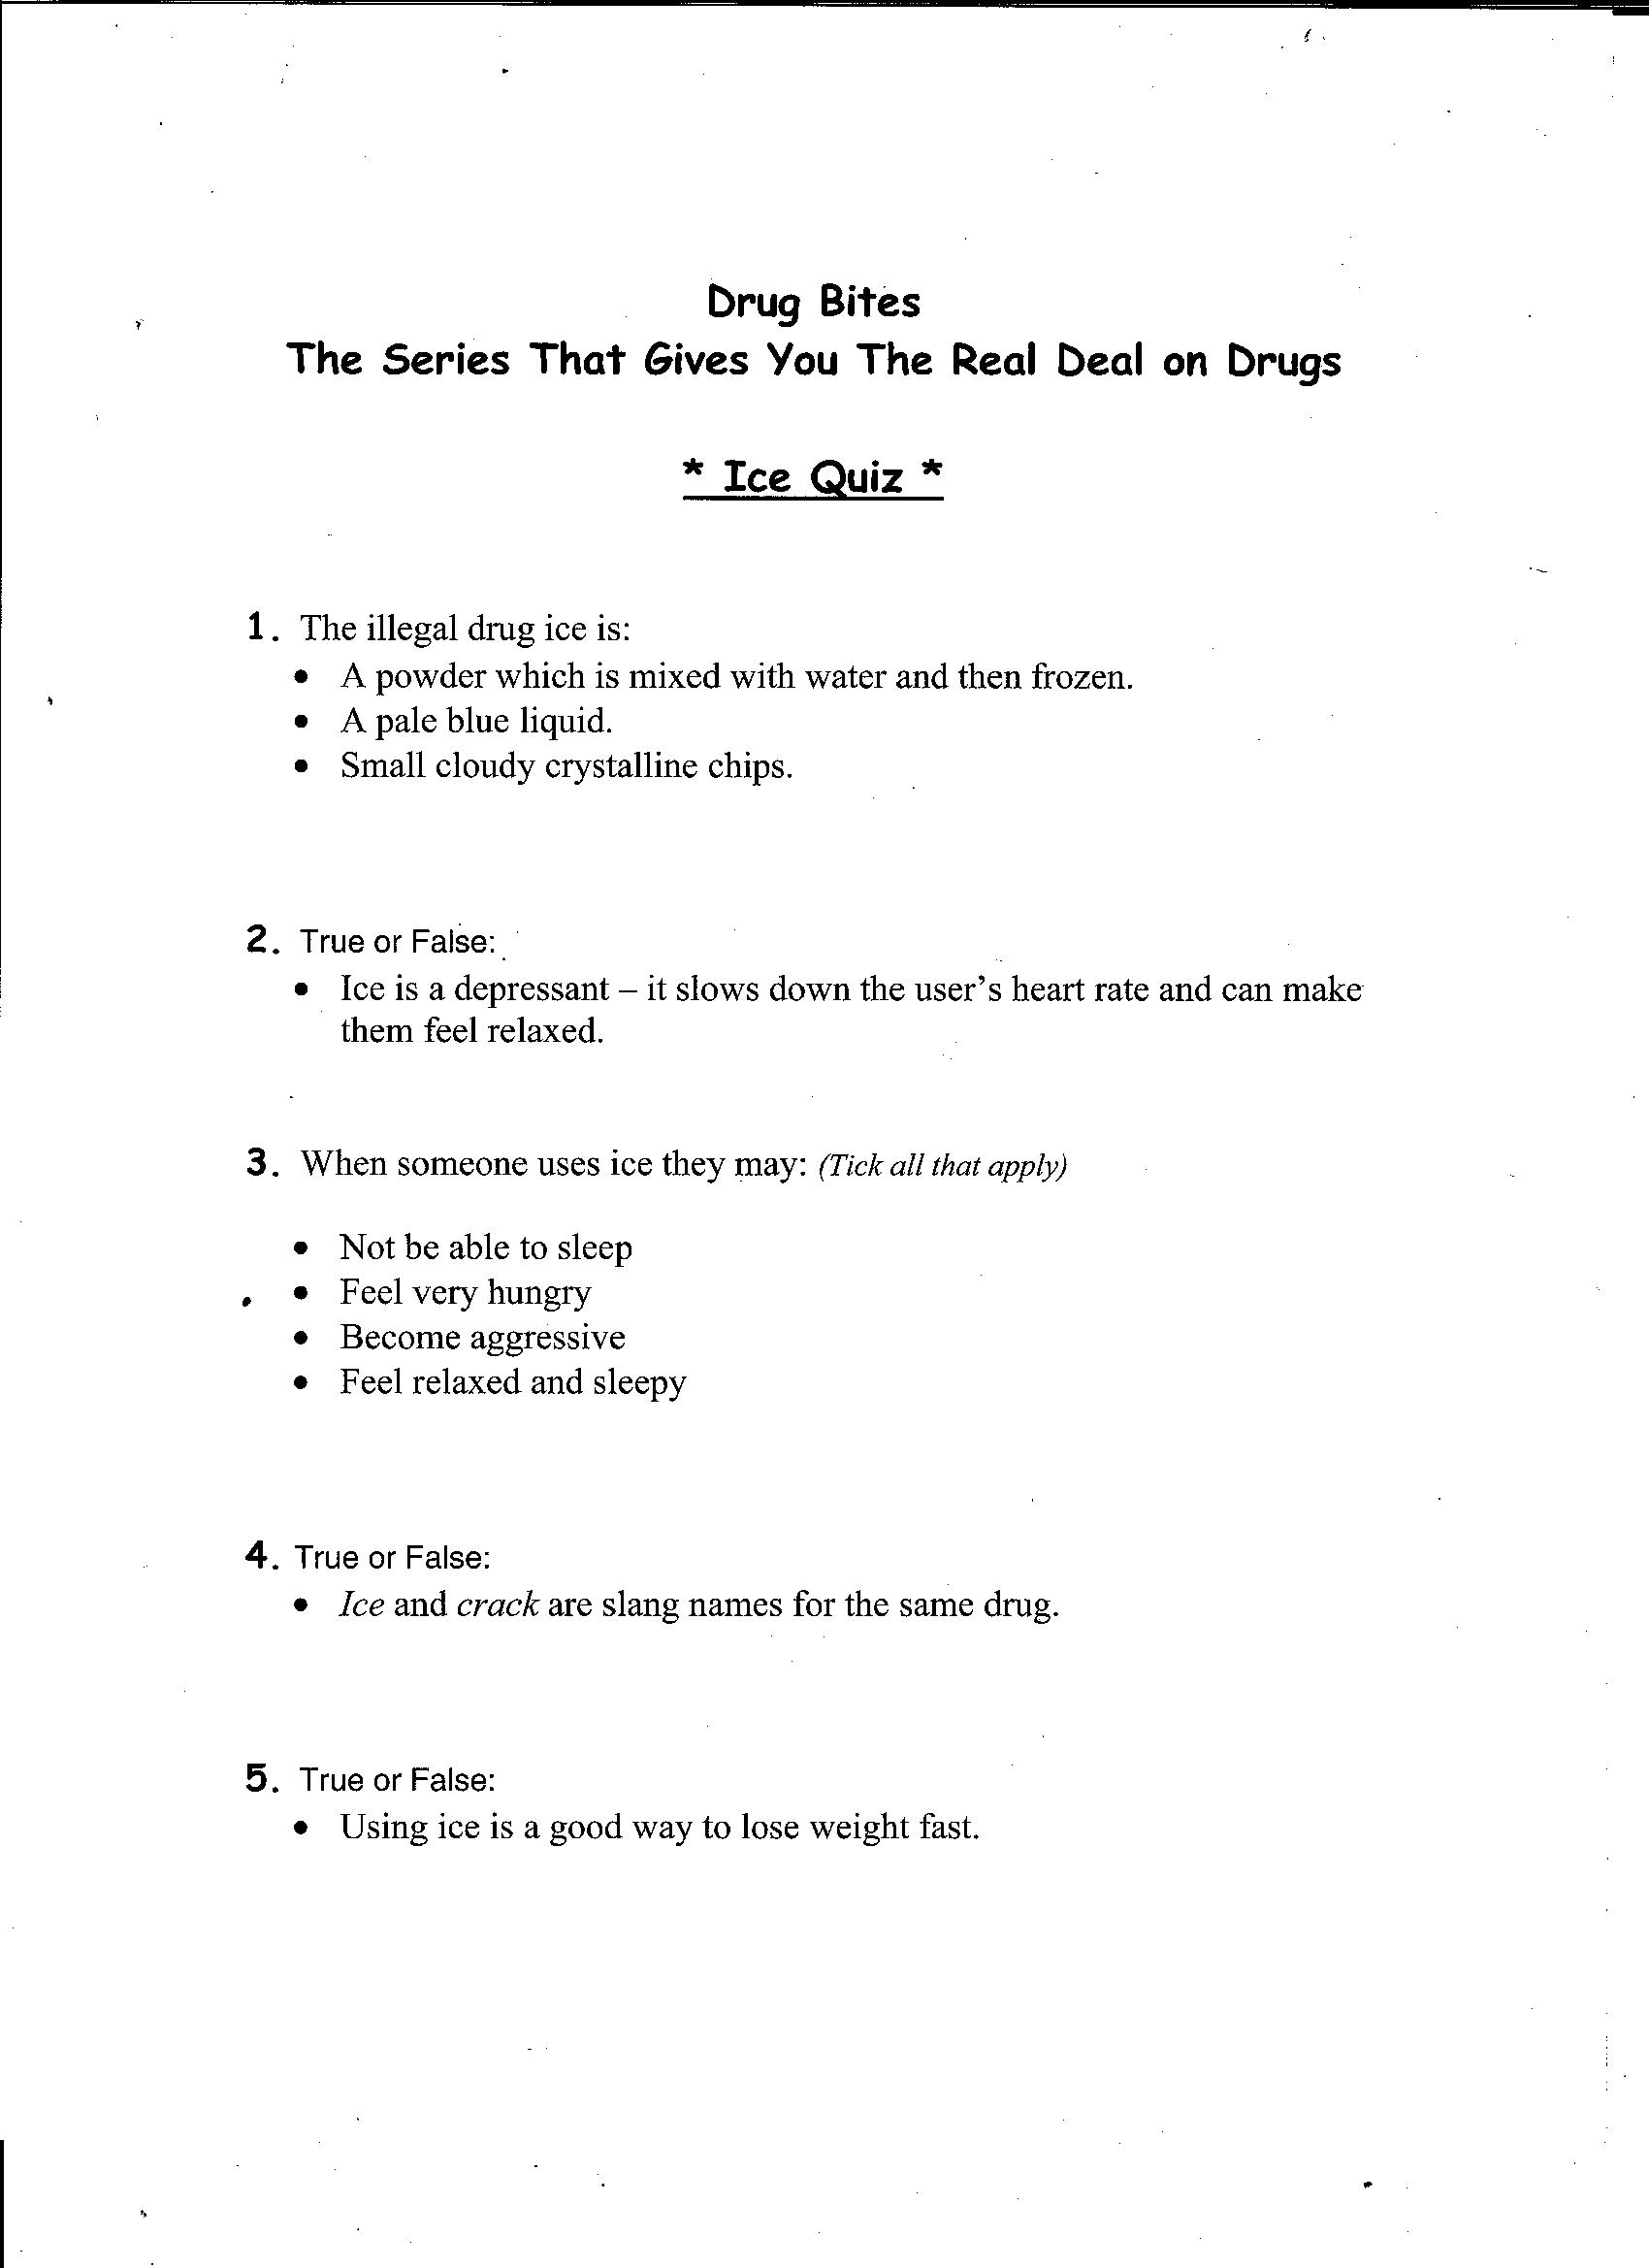 17-best-images-of-fun-in-recovery-worksheets-free-substance-abuse